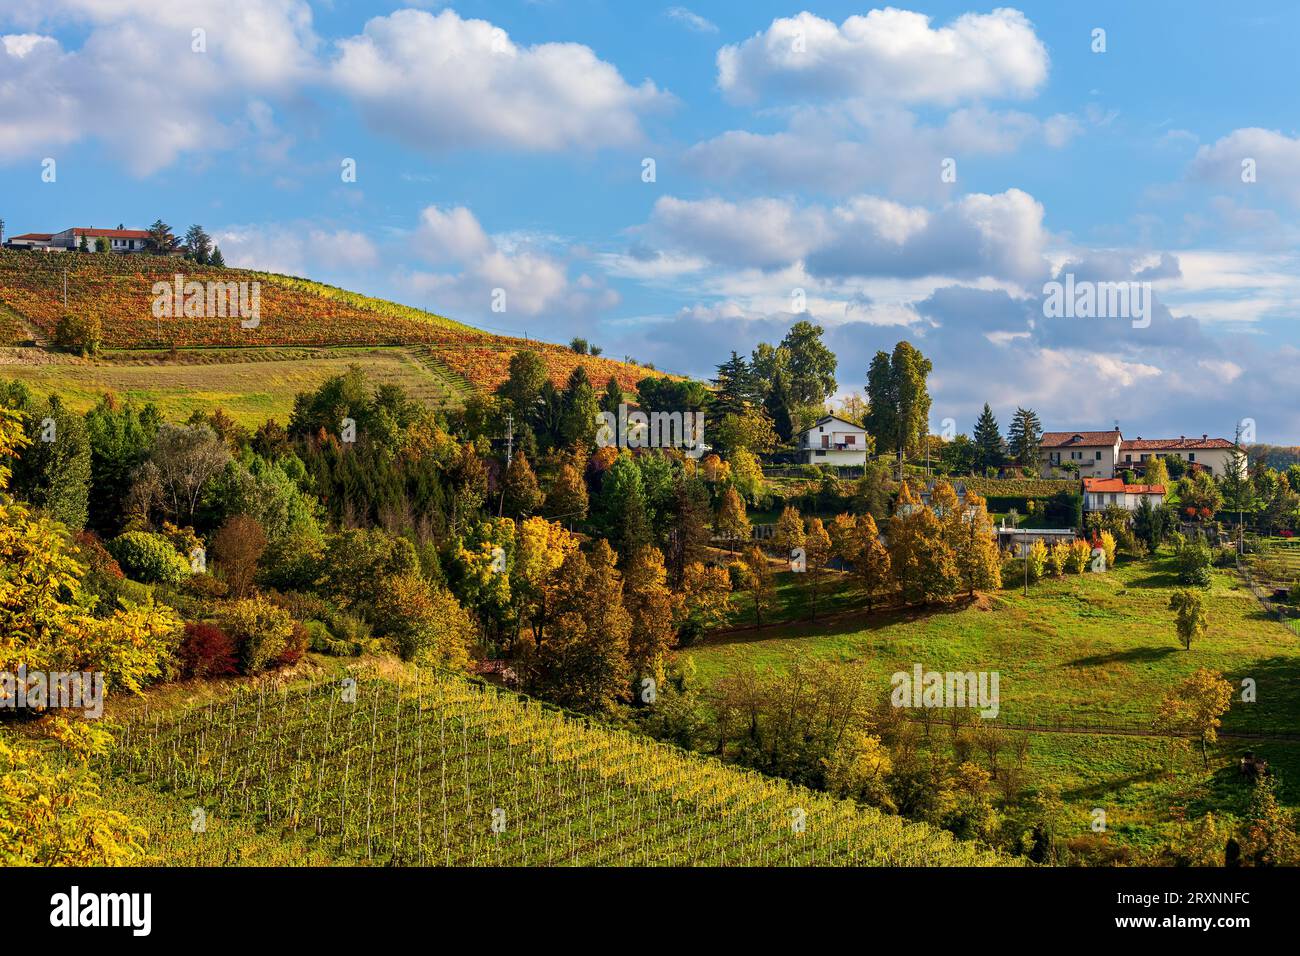 View of the colorful autumnal vineyards and trees on the hills of Langhe in Piedmont, Italy. Stock Photo